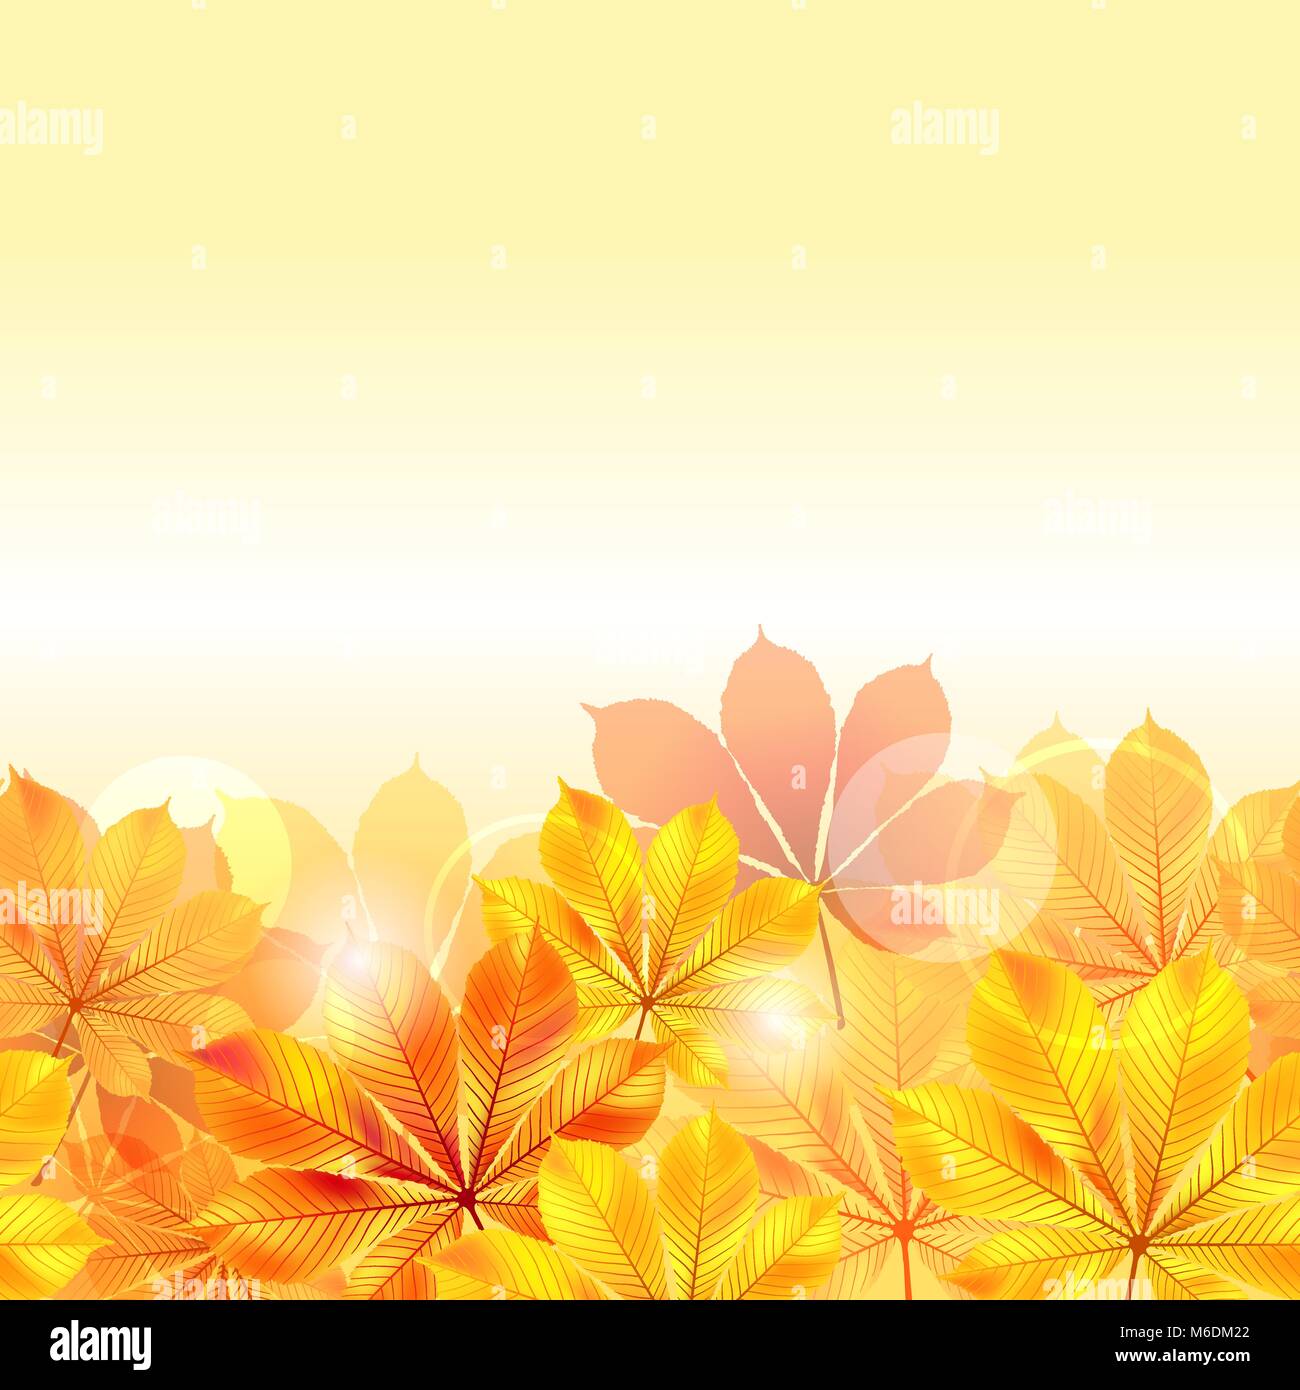 Autumn background with yellow leaves. Stock Vector